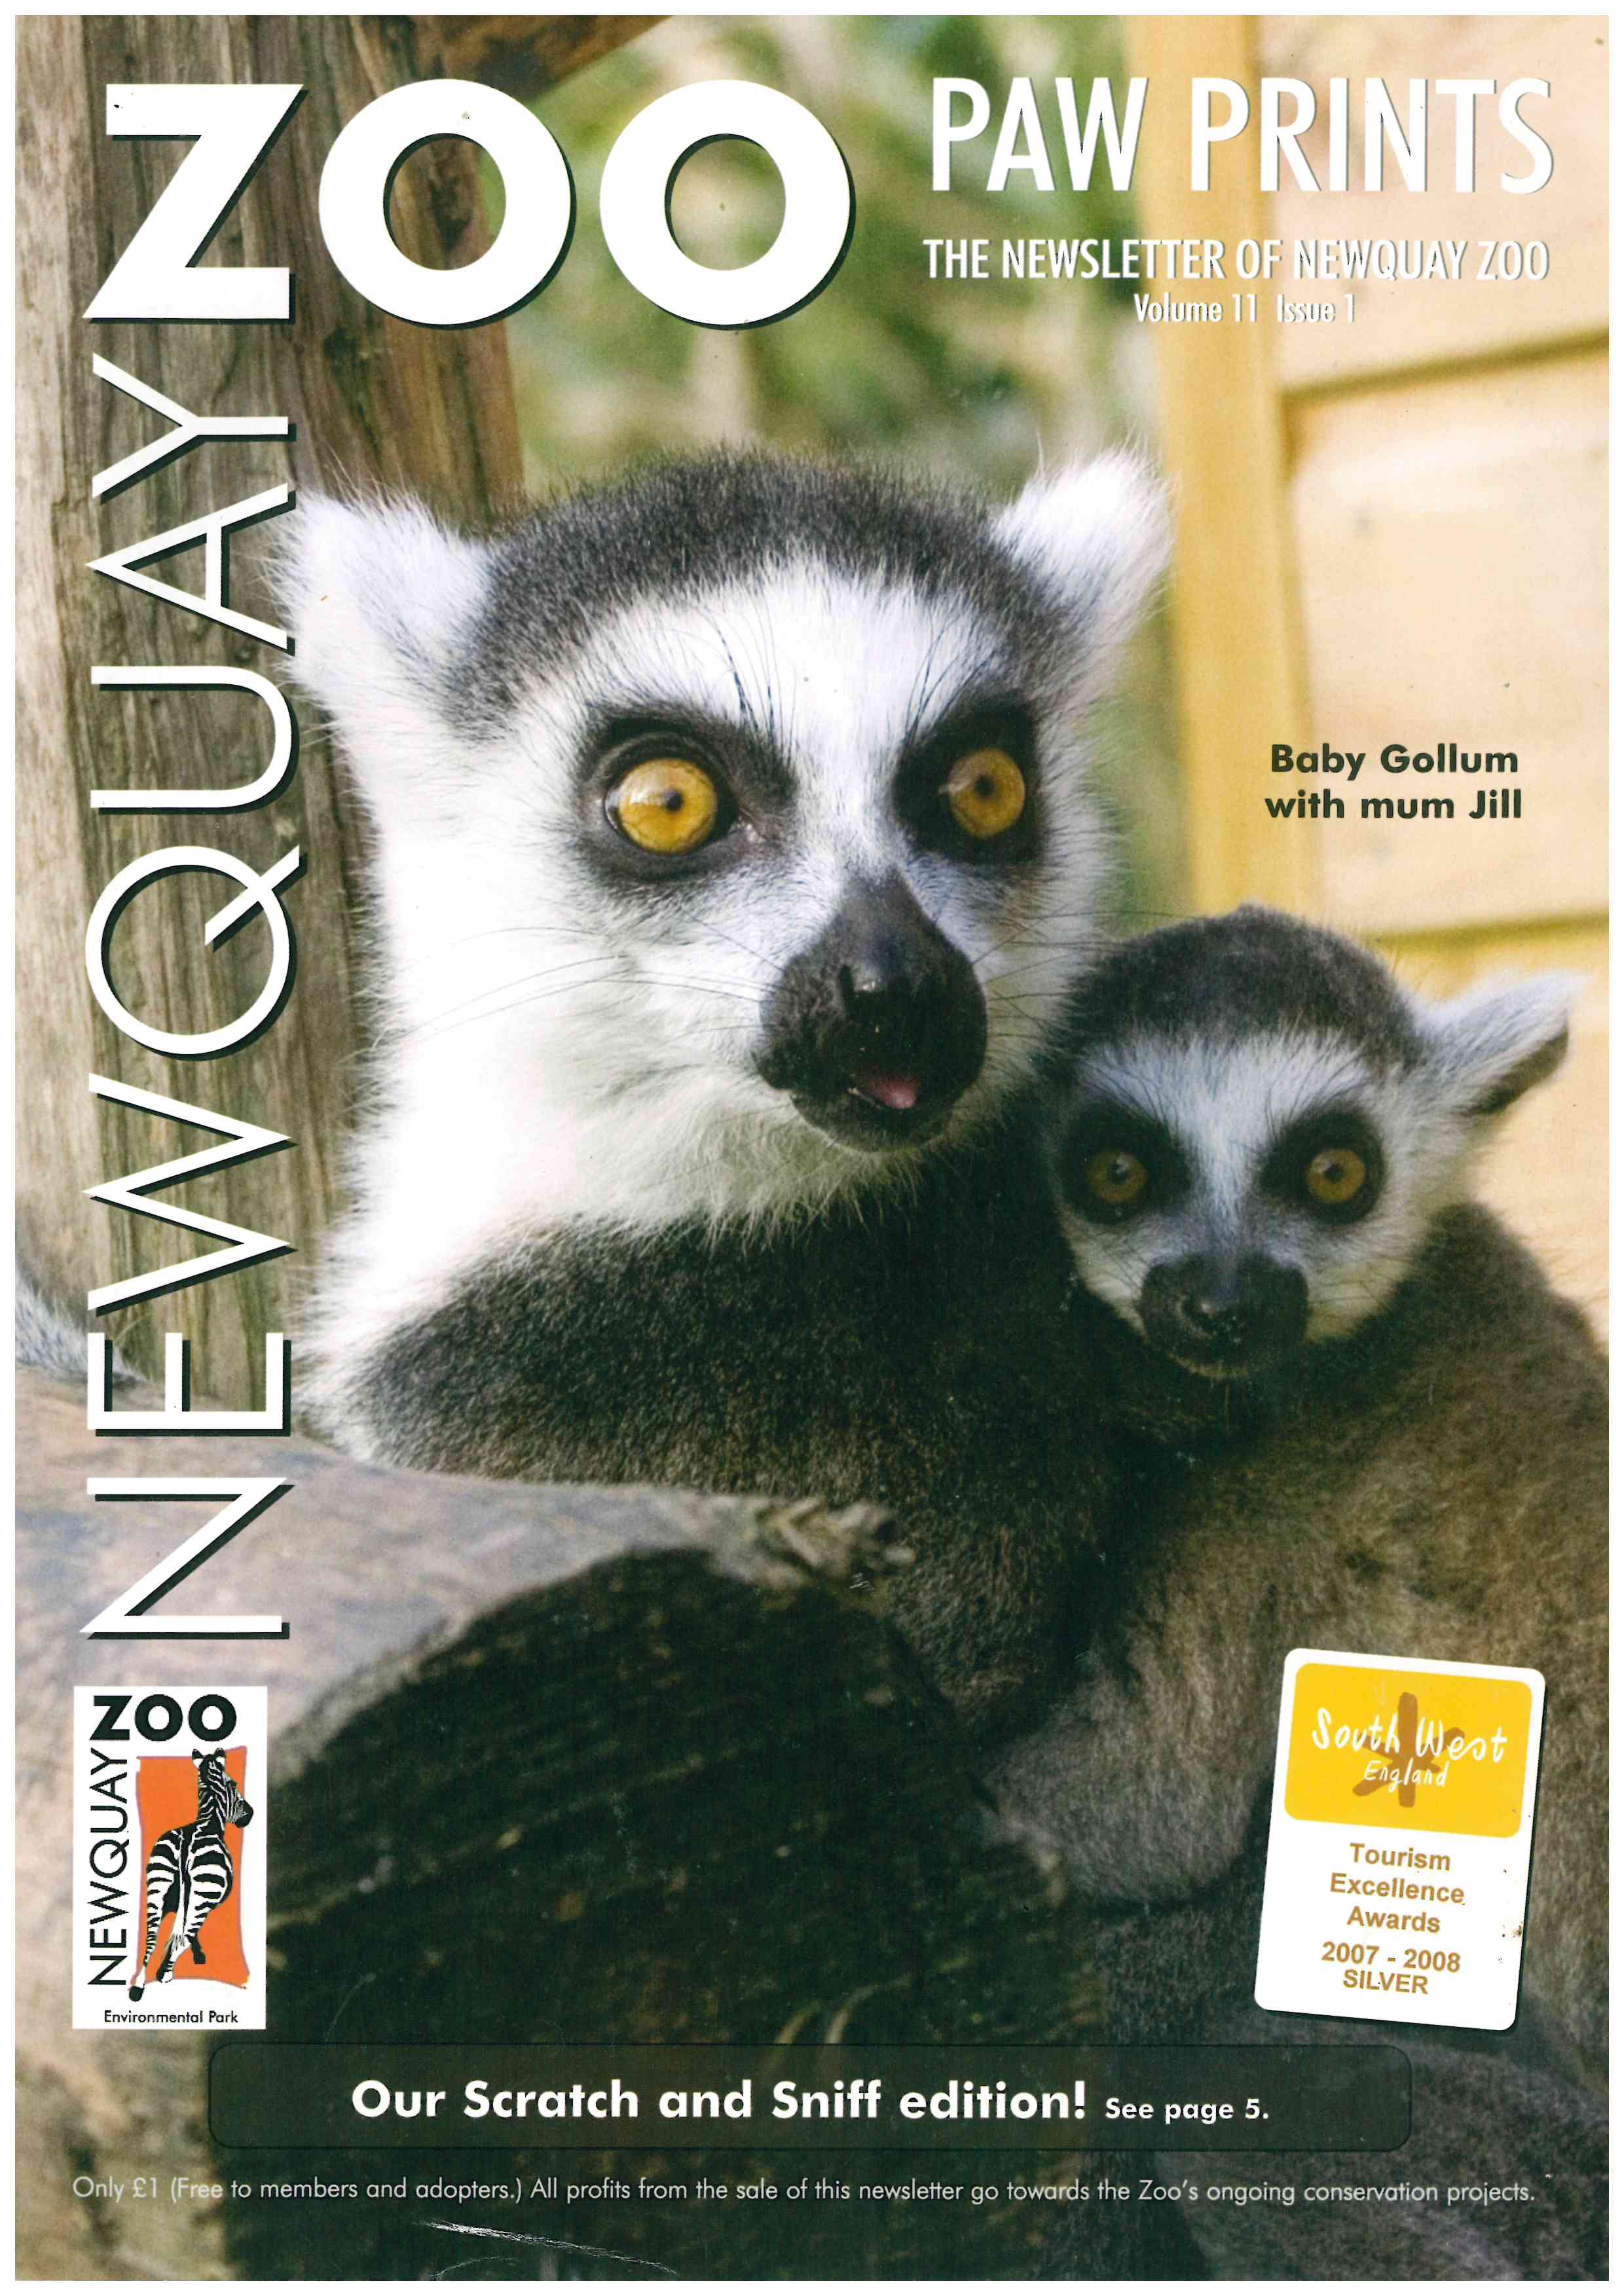 World Lemur Day – a photo essay by Bristol Zoological Society, Environment